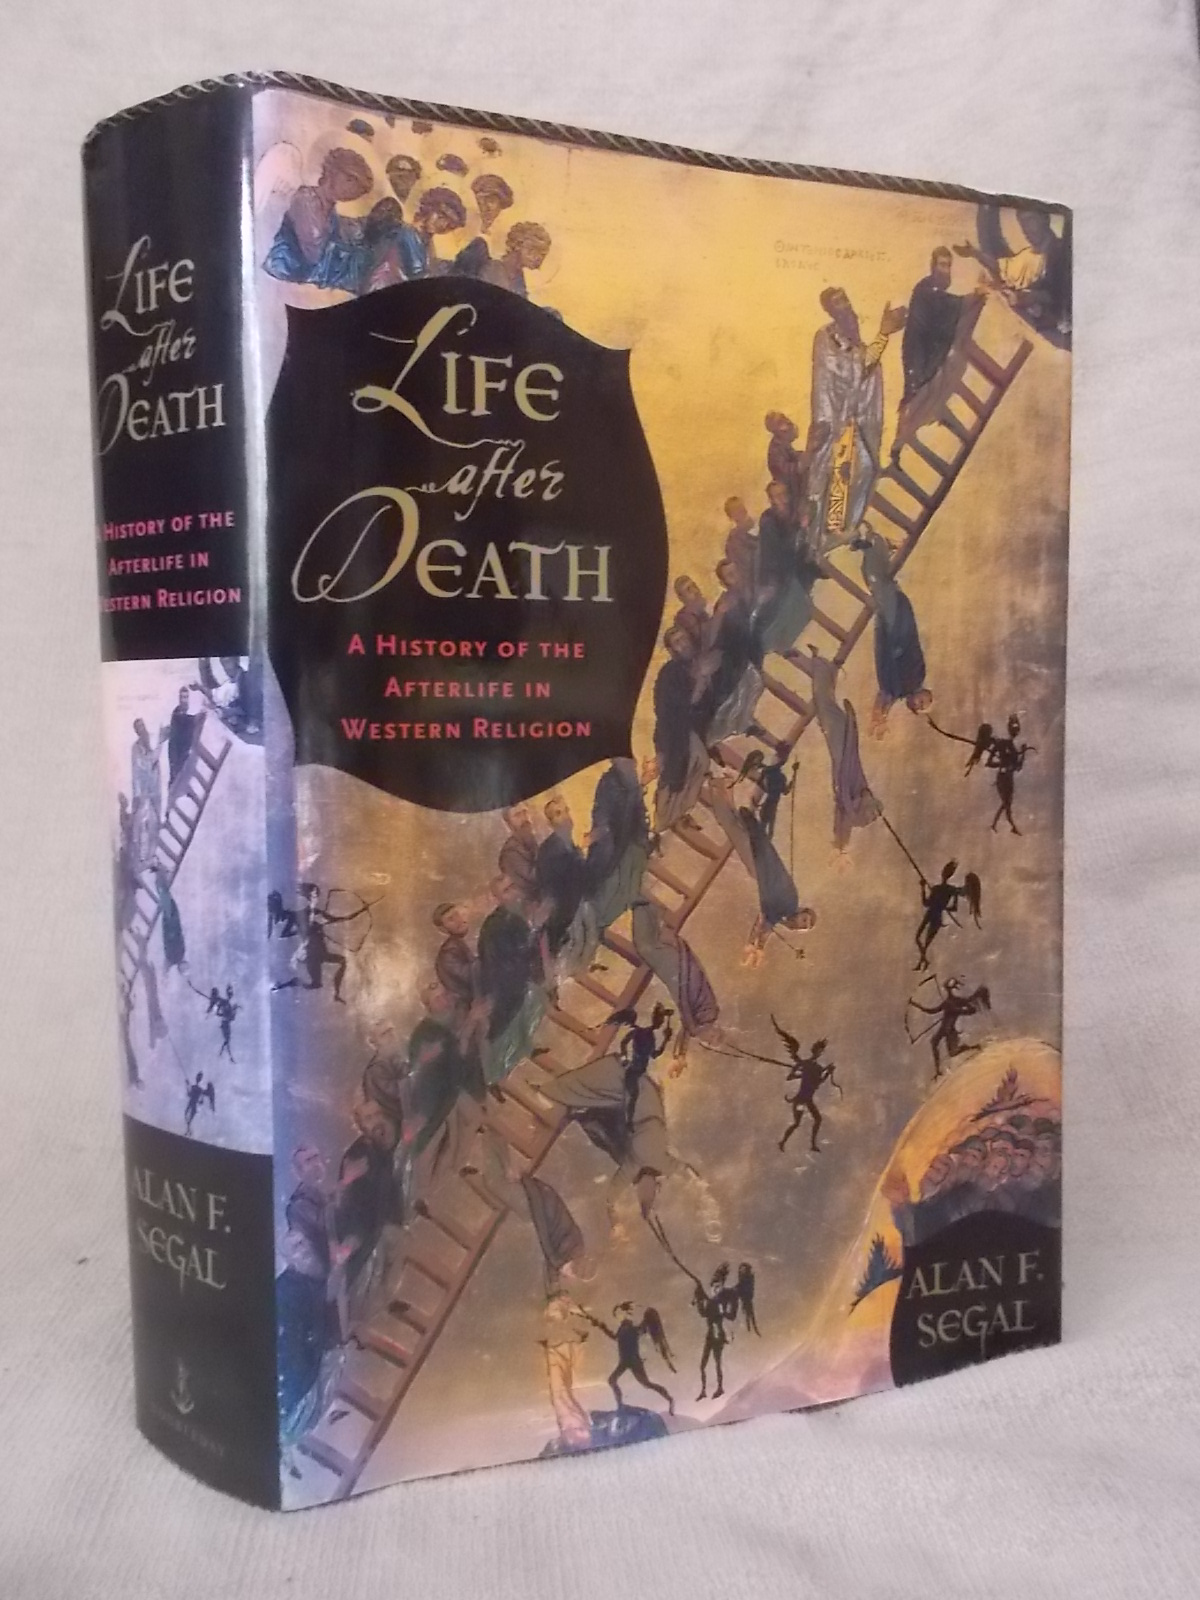 LIFE AFTER DEATH: A HISTORY OF THE AFTERLIFE IN WESTERN RELIGION - Segal, Alan F.